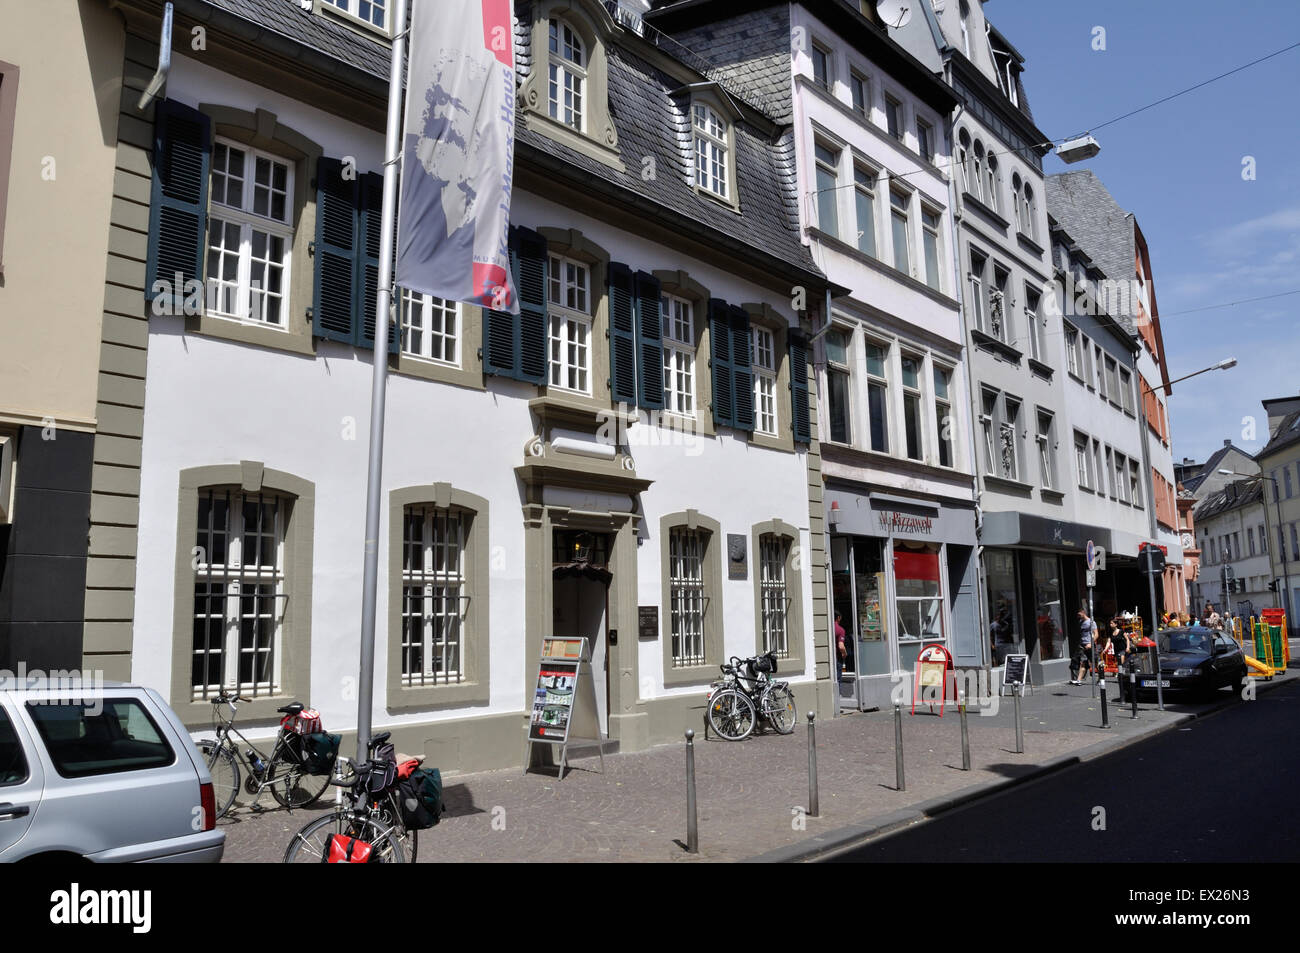 The birthplace of Karl Marx in Trier, Germany, is now a museum dedicated to his life and work. Stock Photo